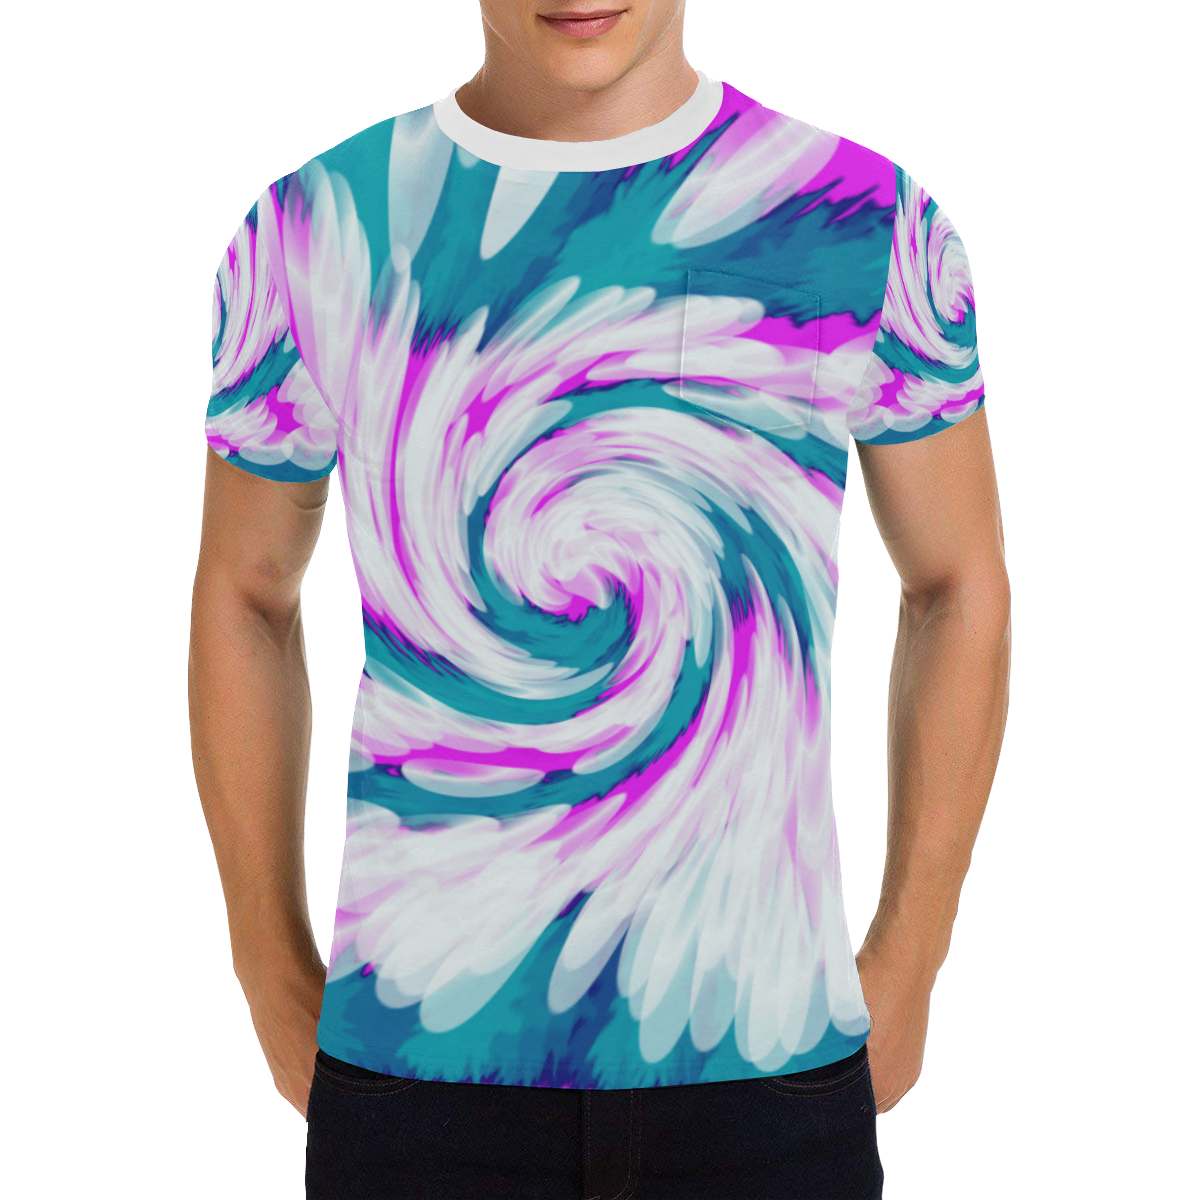 Turquoise Pink Tie Dye Swirl Abstract Men's All Over Print T-Shirt with Chest Pocket (Model T56)